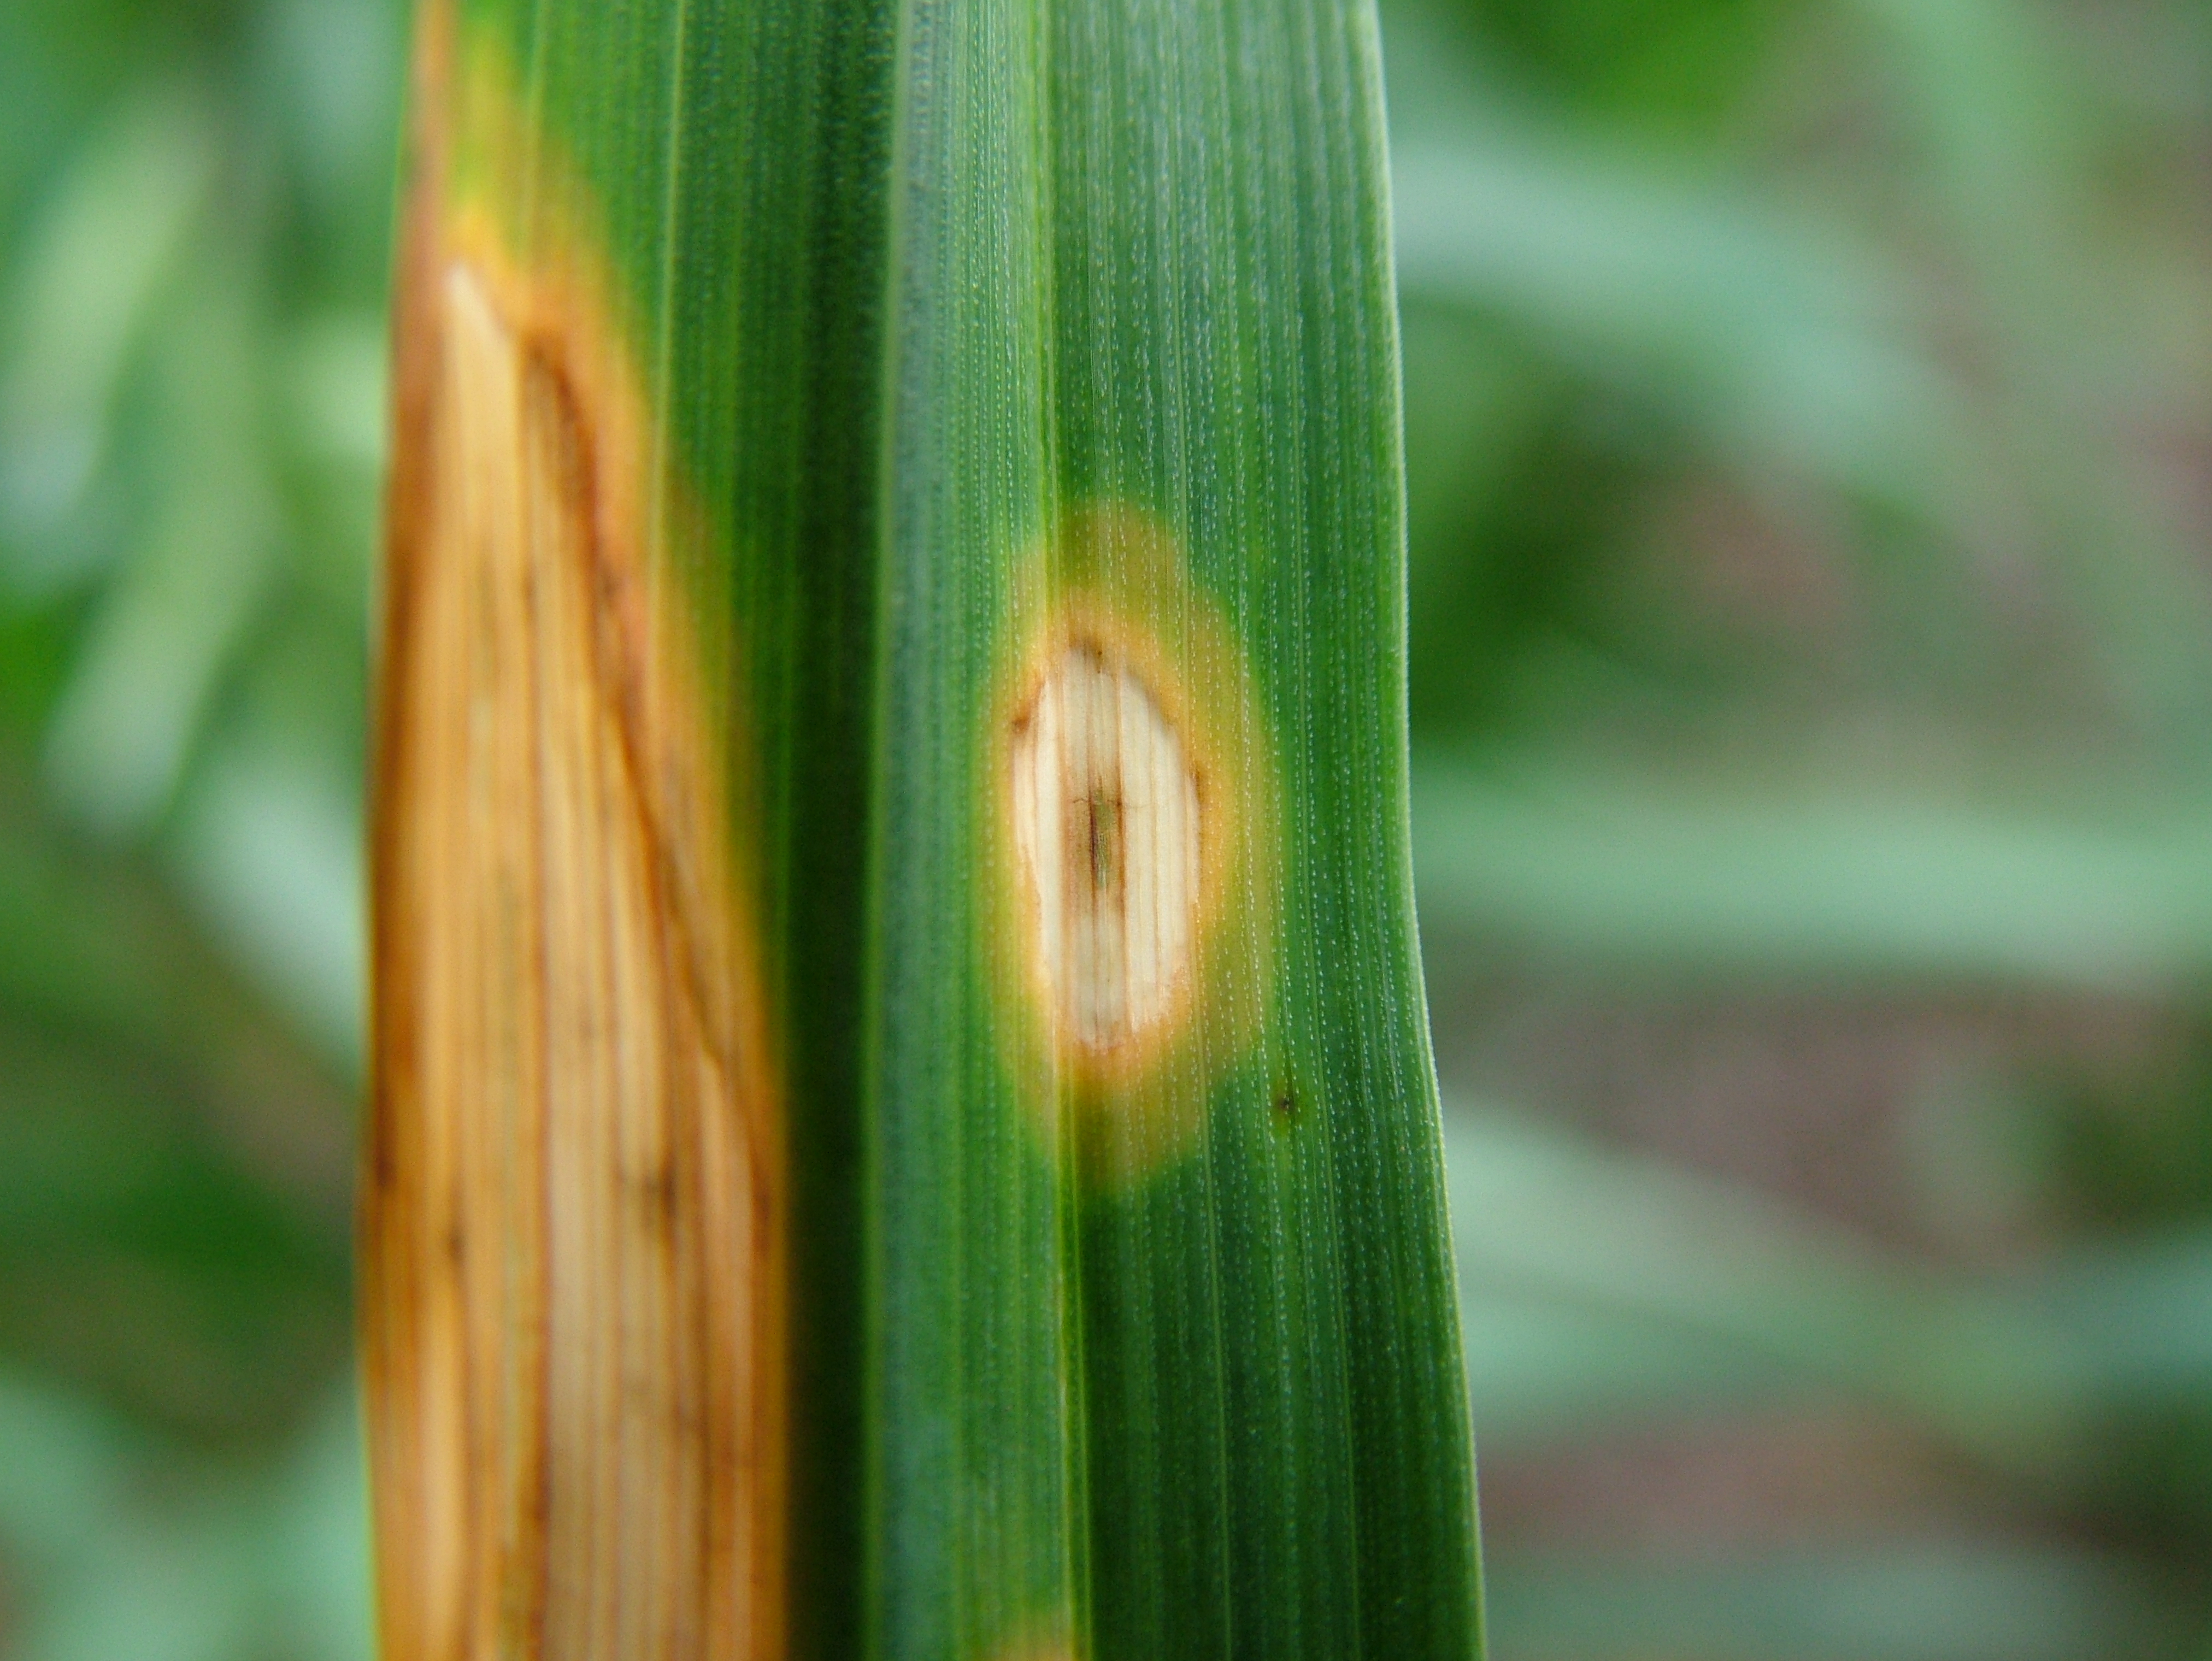 Oblong halo blight lesions on oat leaves. Details in text following the image.